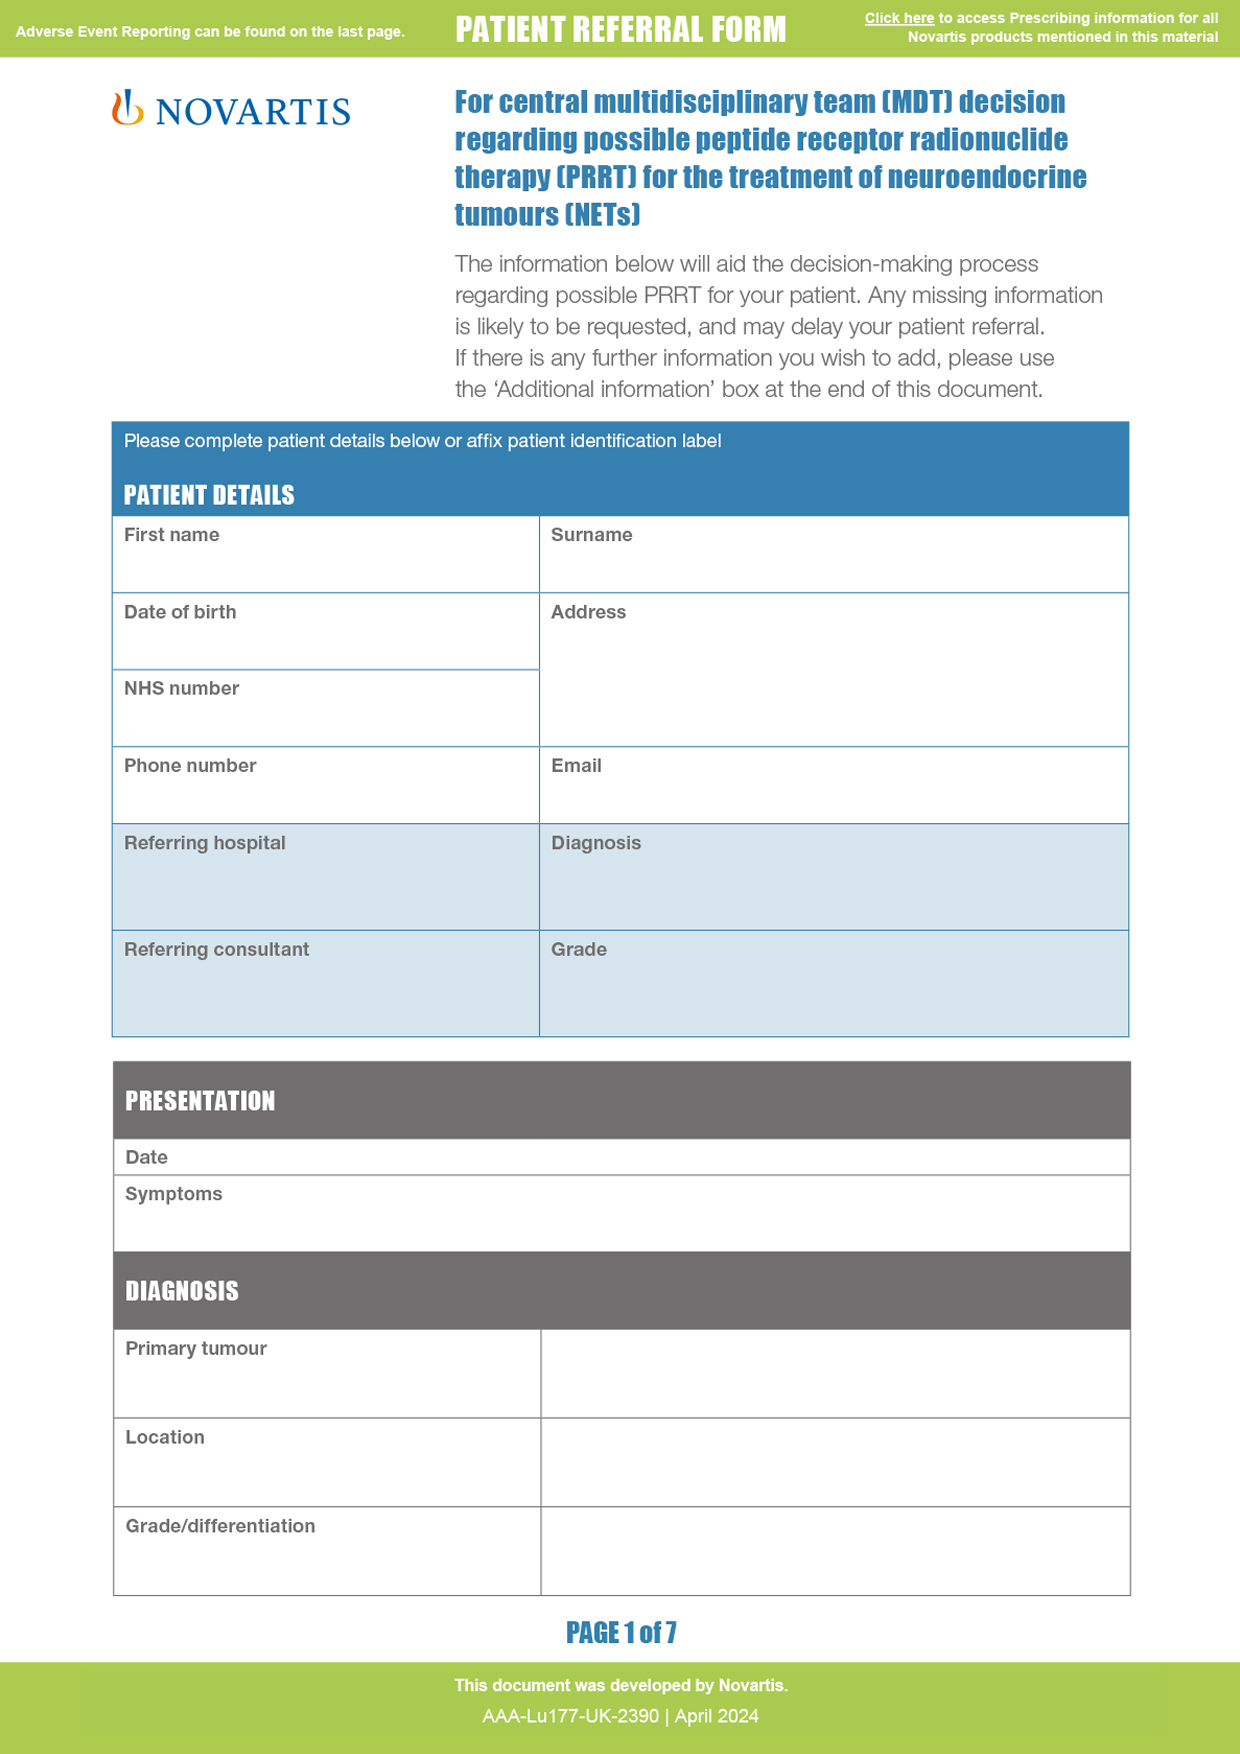 Preview image of the patient referral form